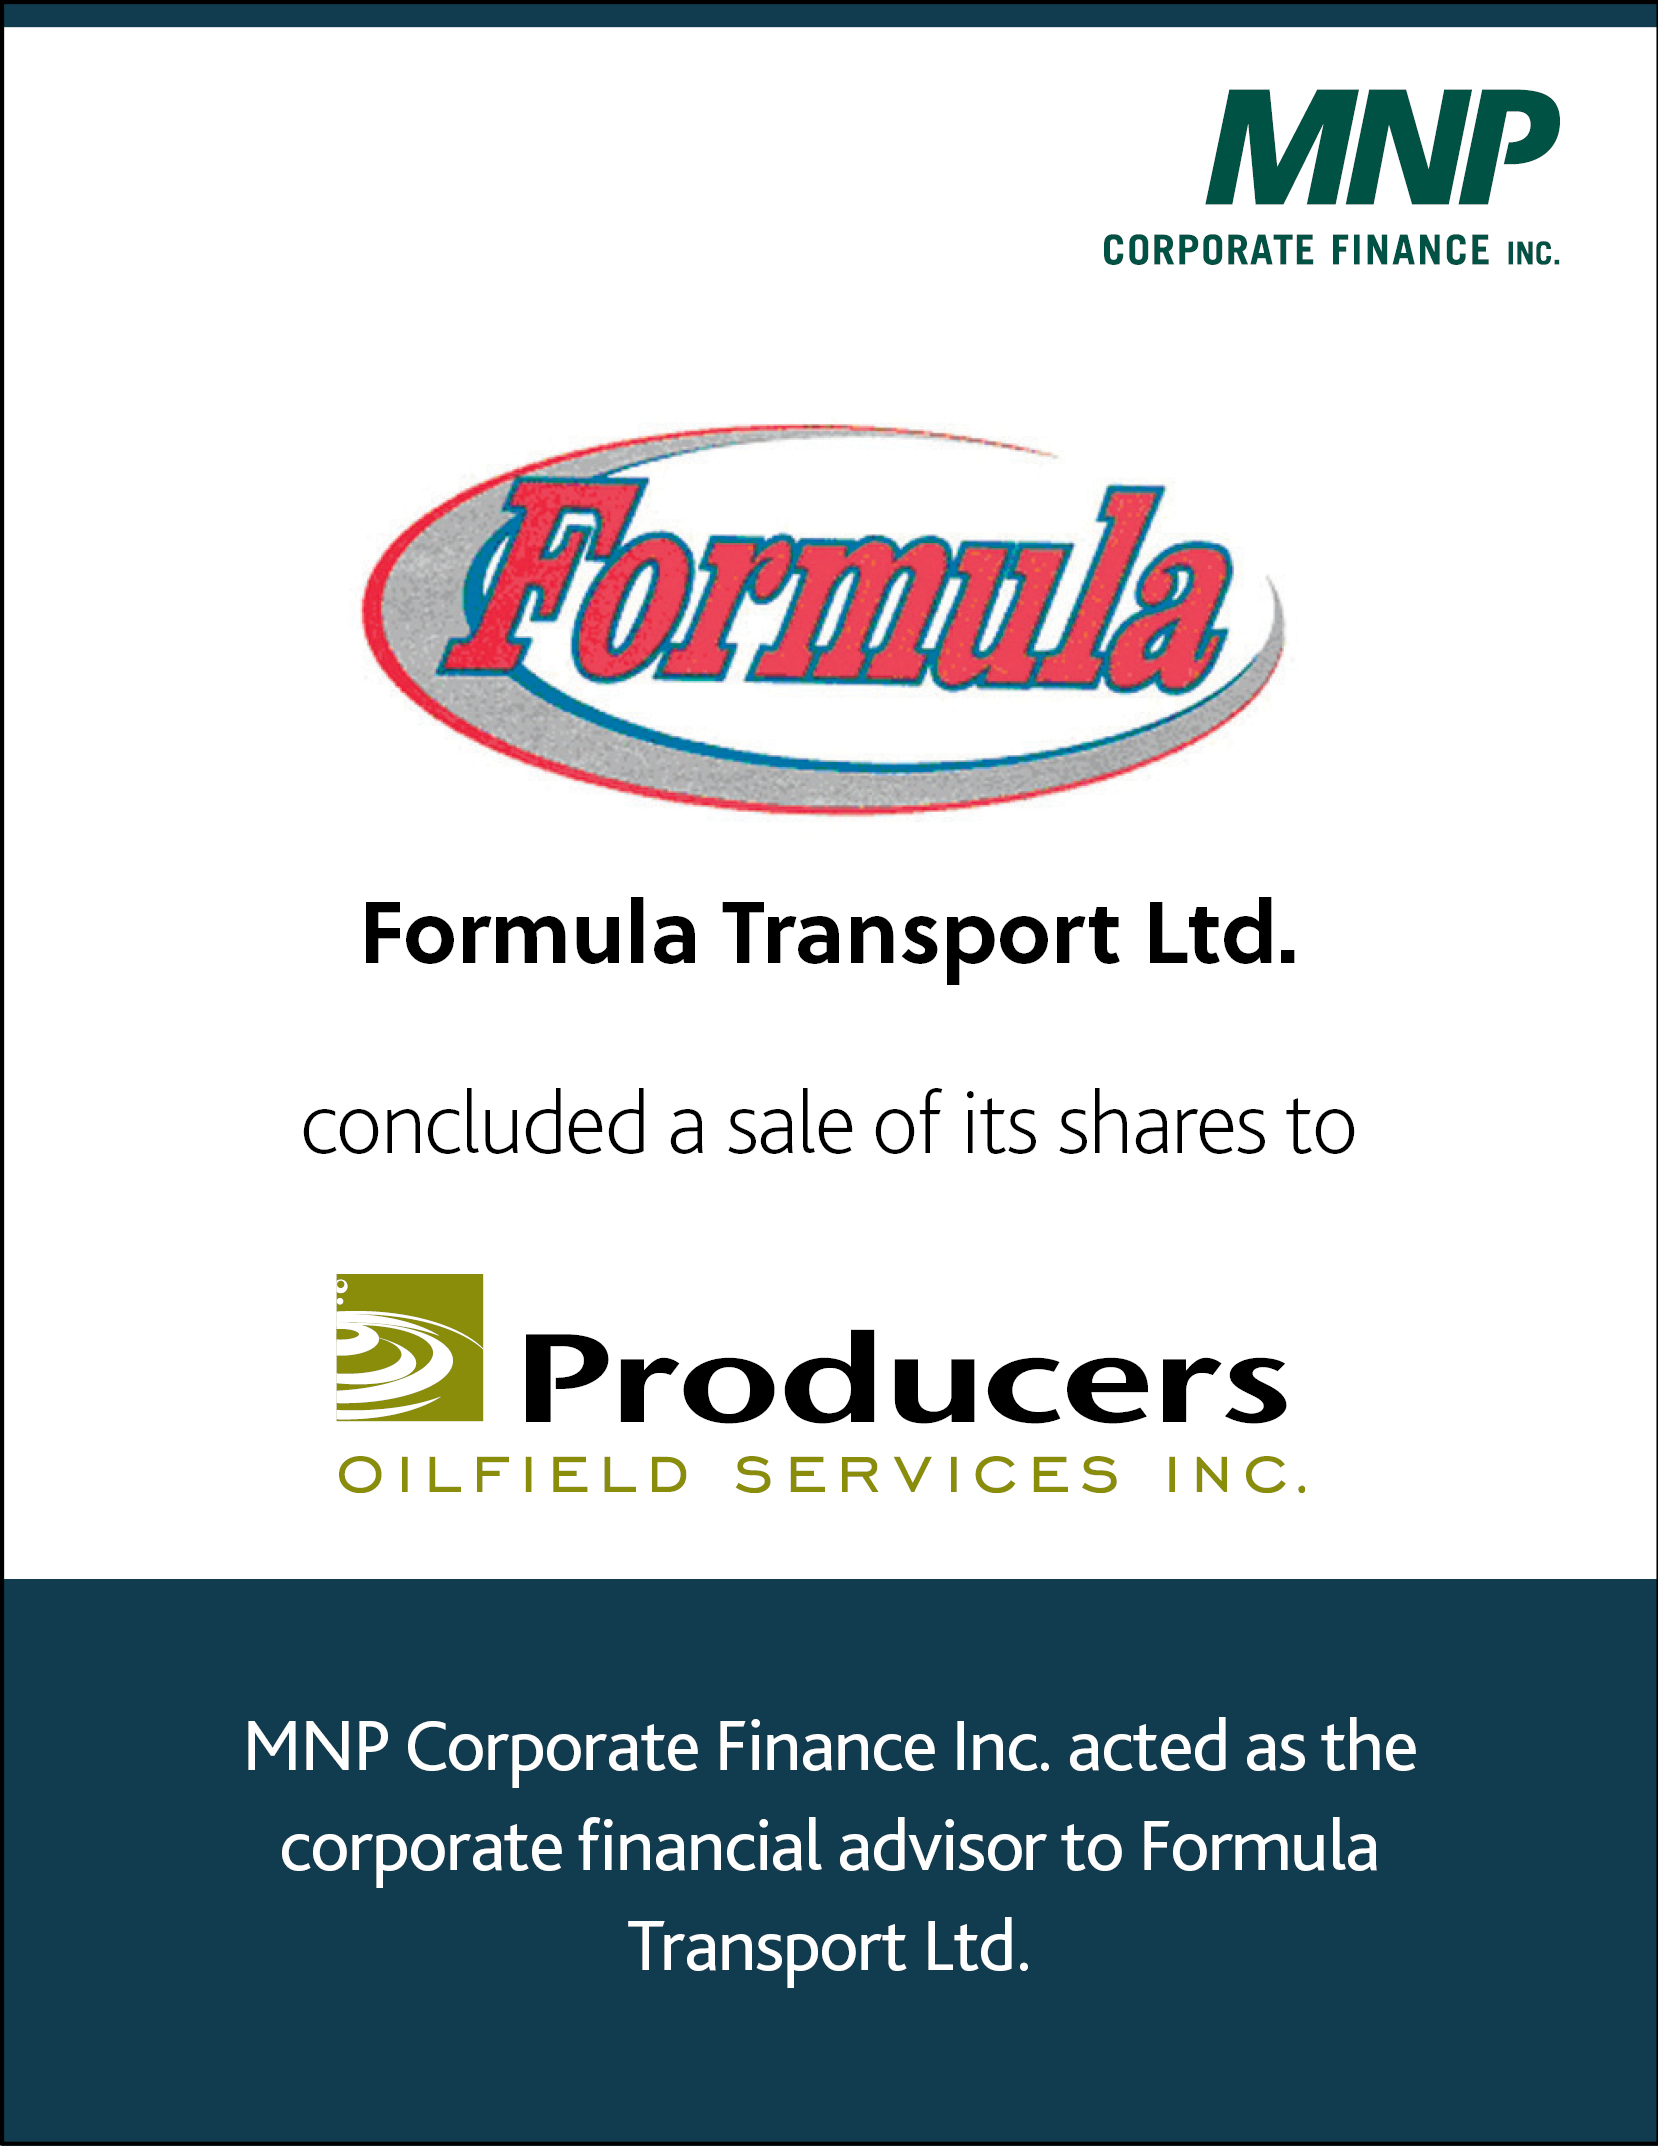 Formula Transport Ltd concluded a sale of its shares to Producers Oilfield Services Inc